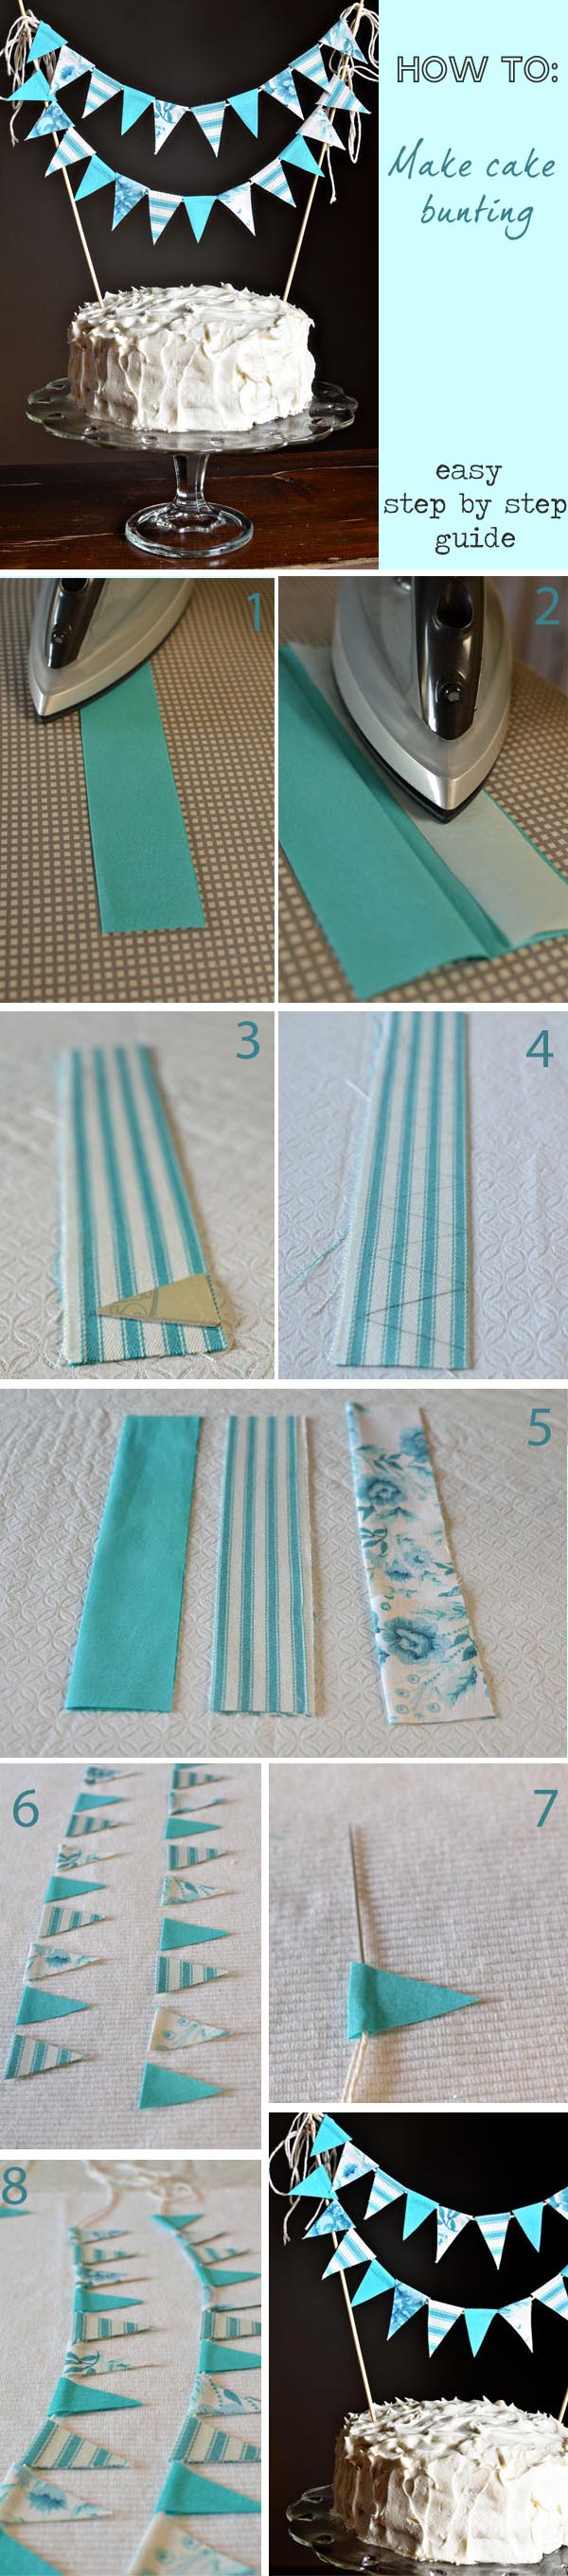 how to make cake bunting